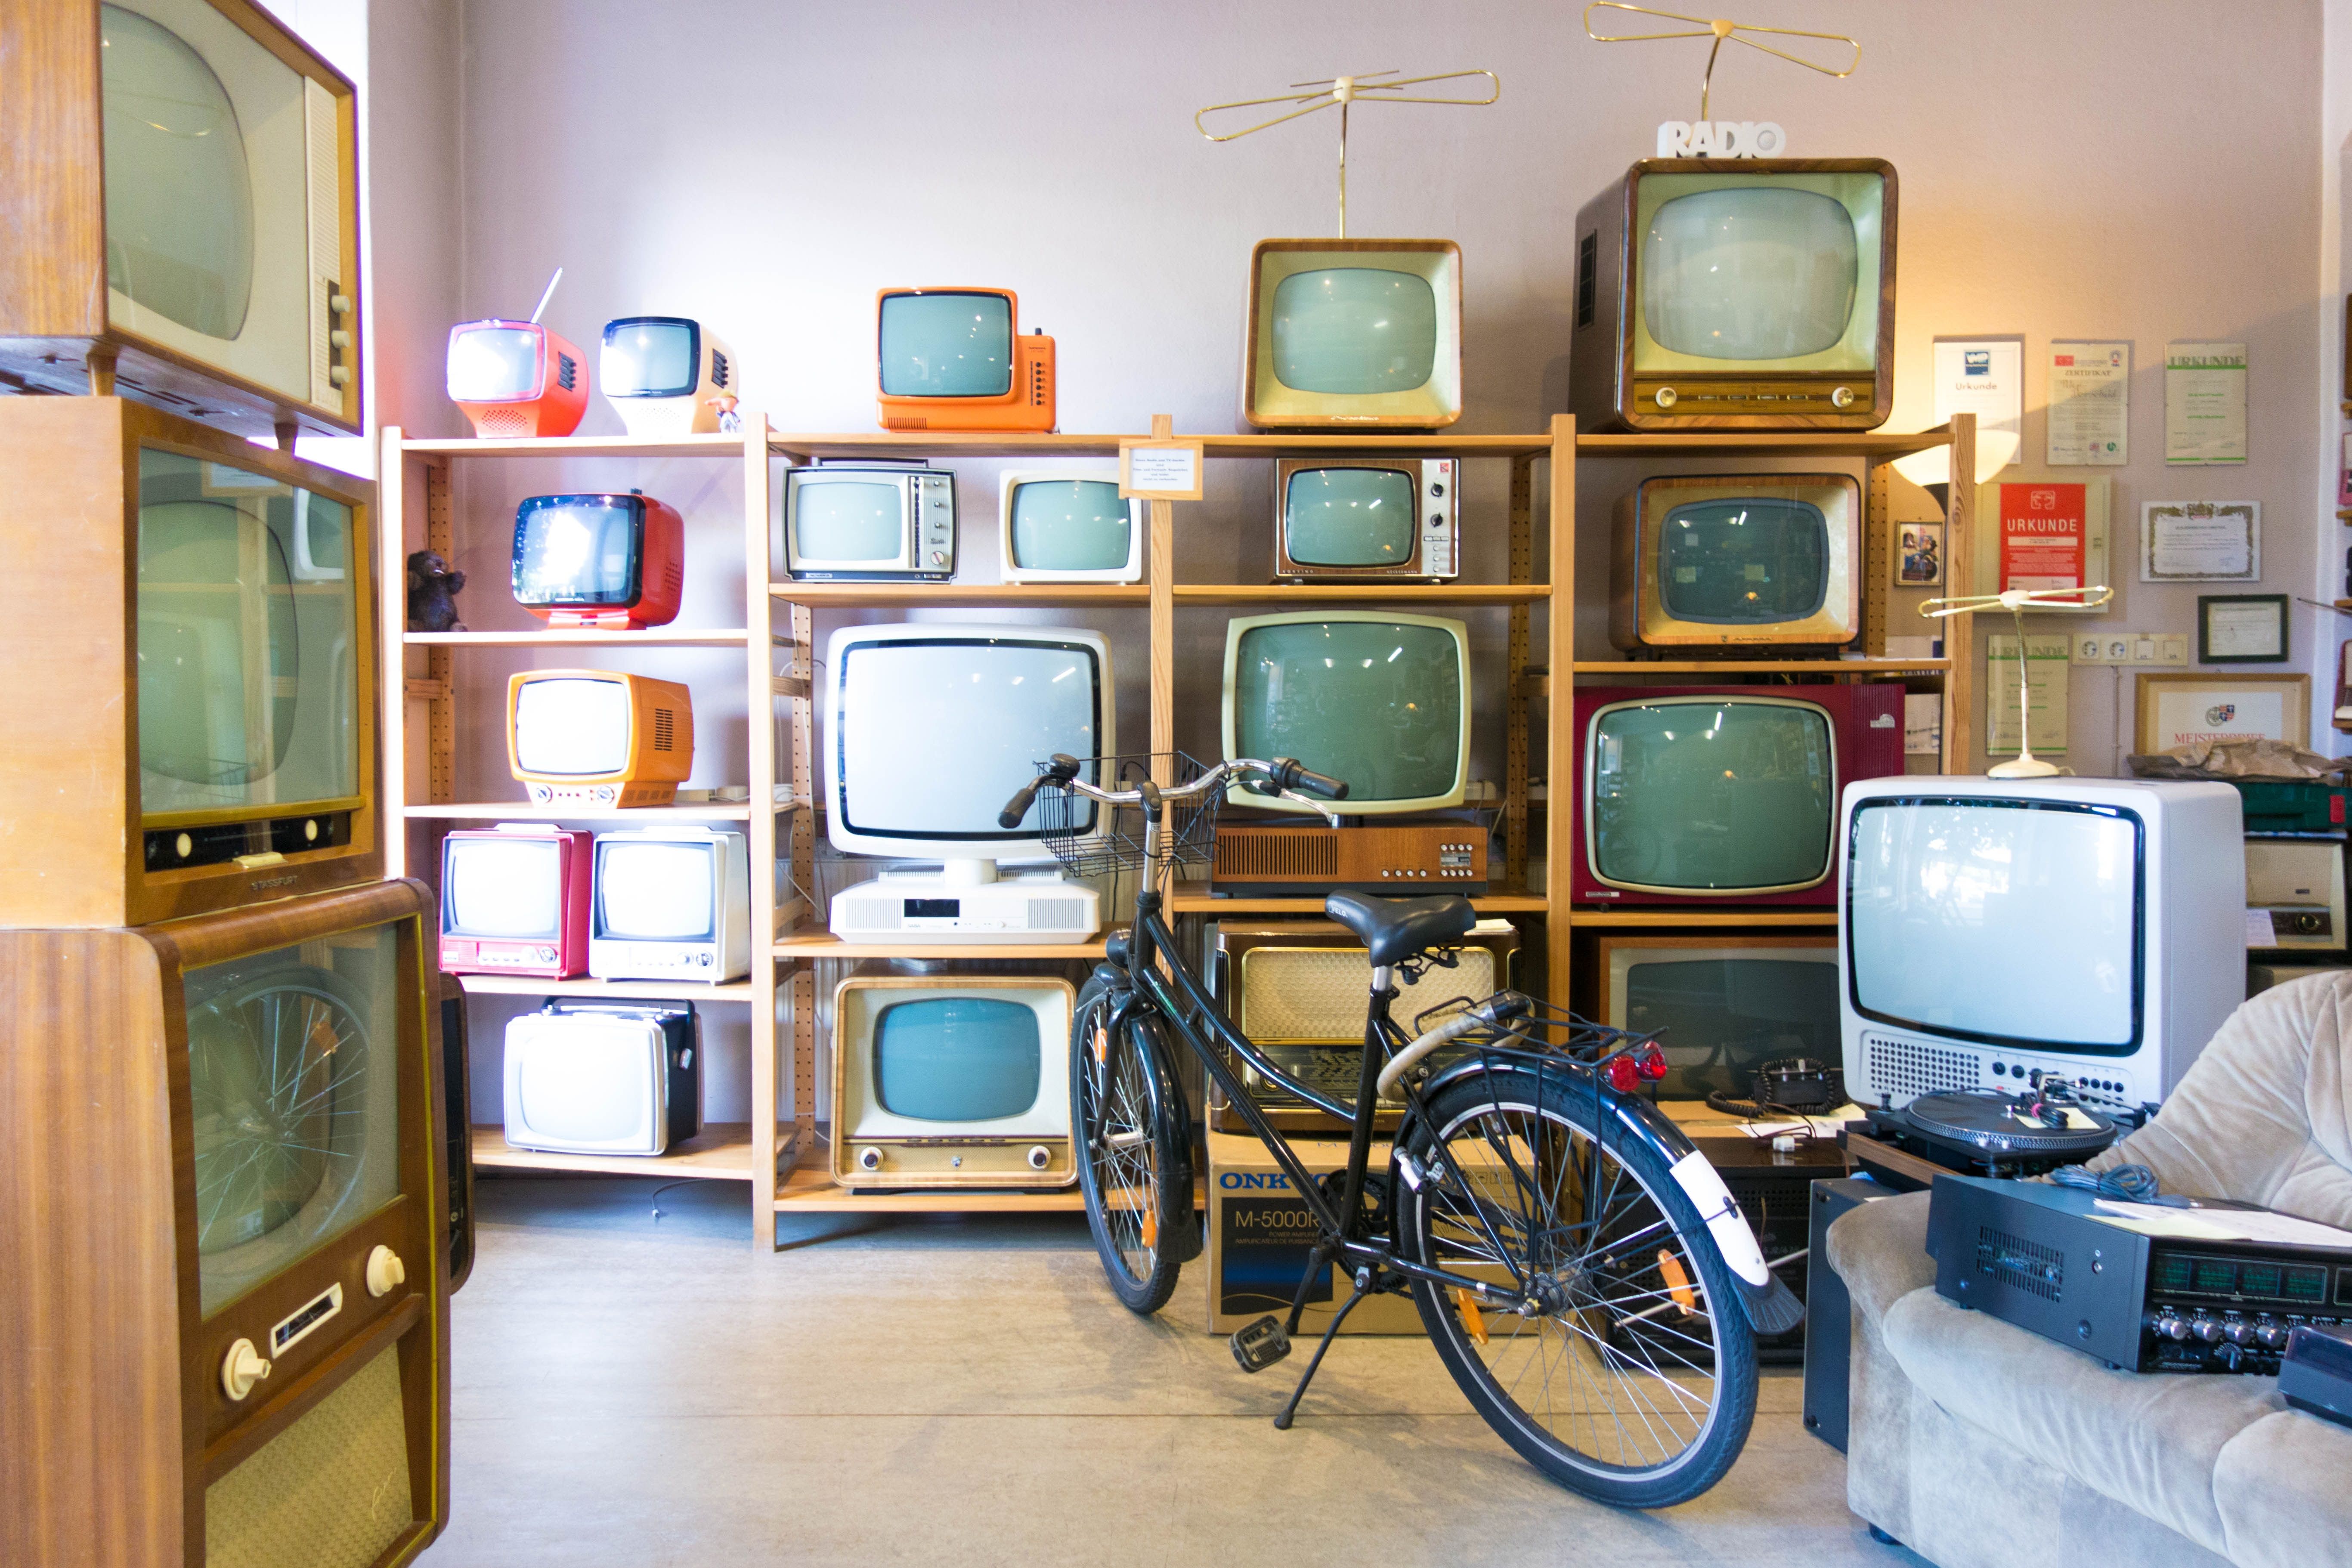 5464x3643 #television, #bicycle, #television equipment